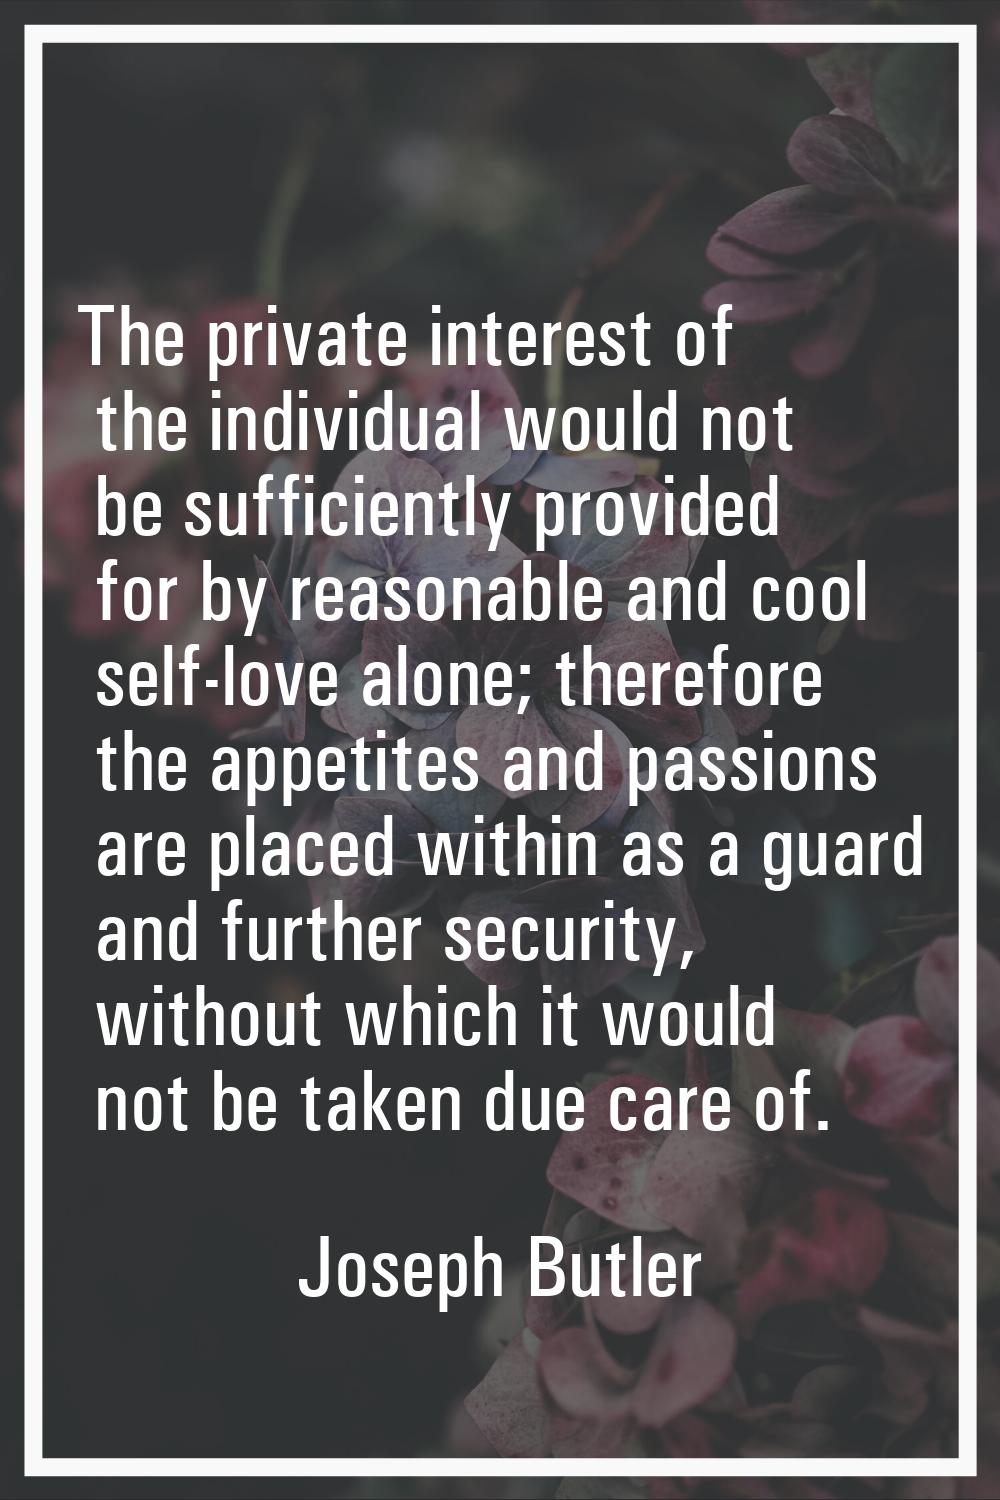 The private interest of the individual would not be sufficiently provided for by reasonable and coo